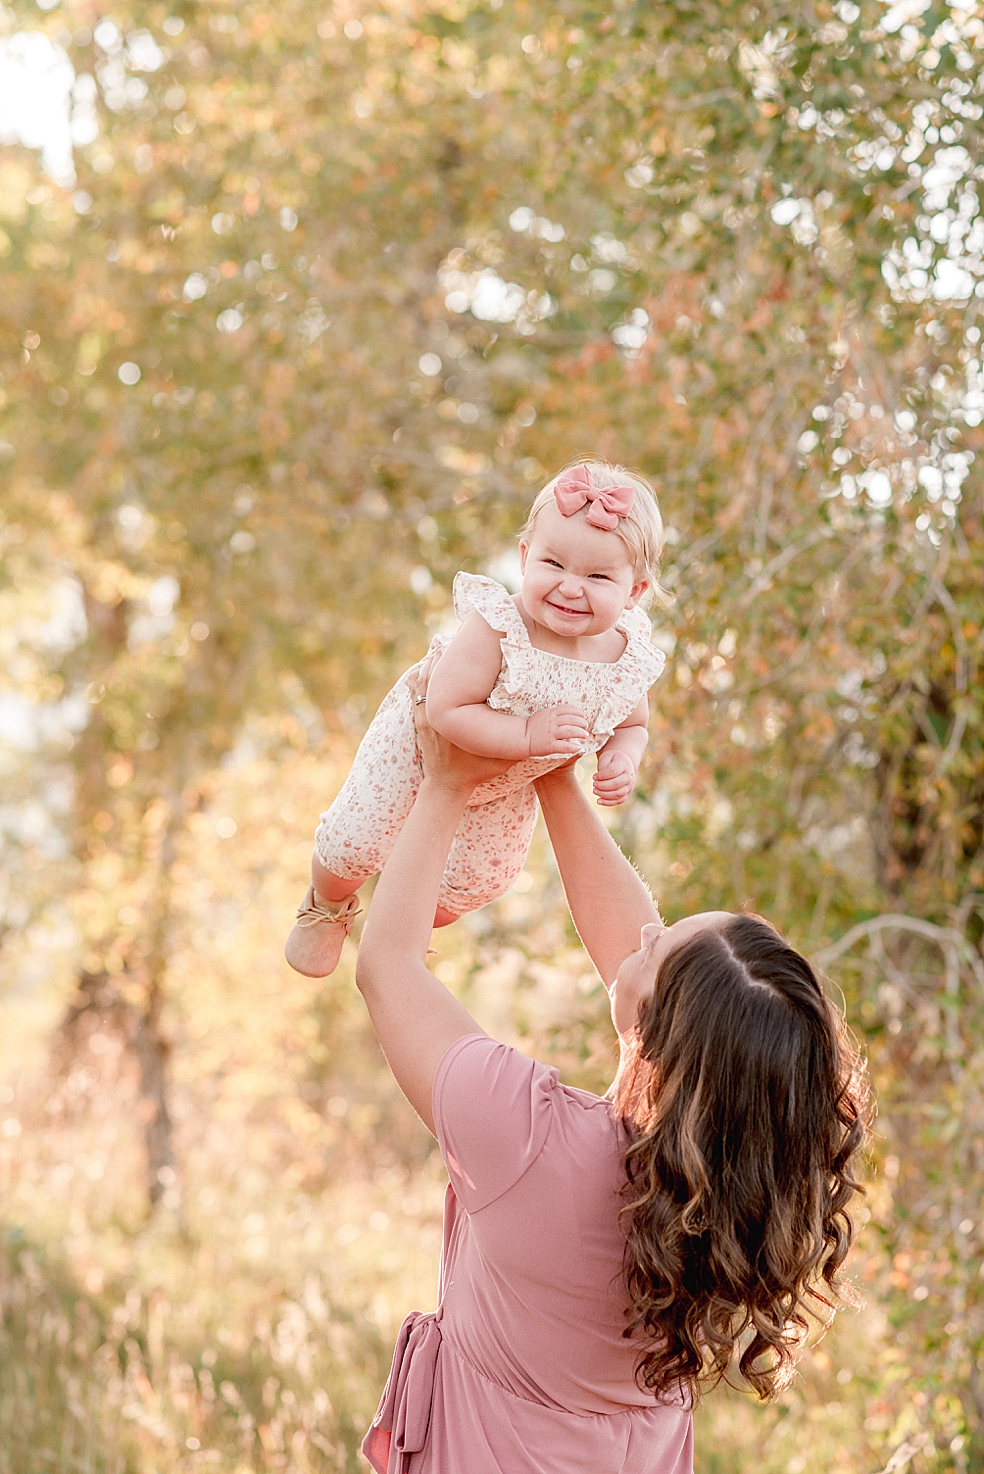 Mom in pink dress playing with baby girl | Photo by Jessica Lee Photography